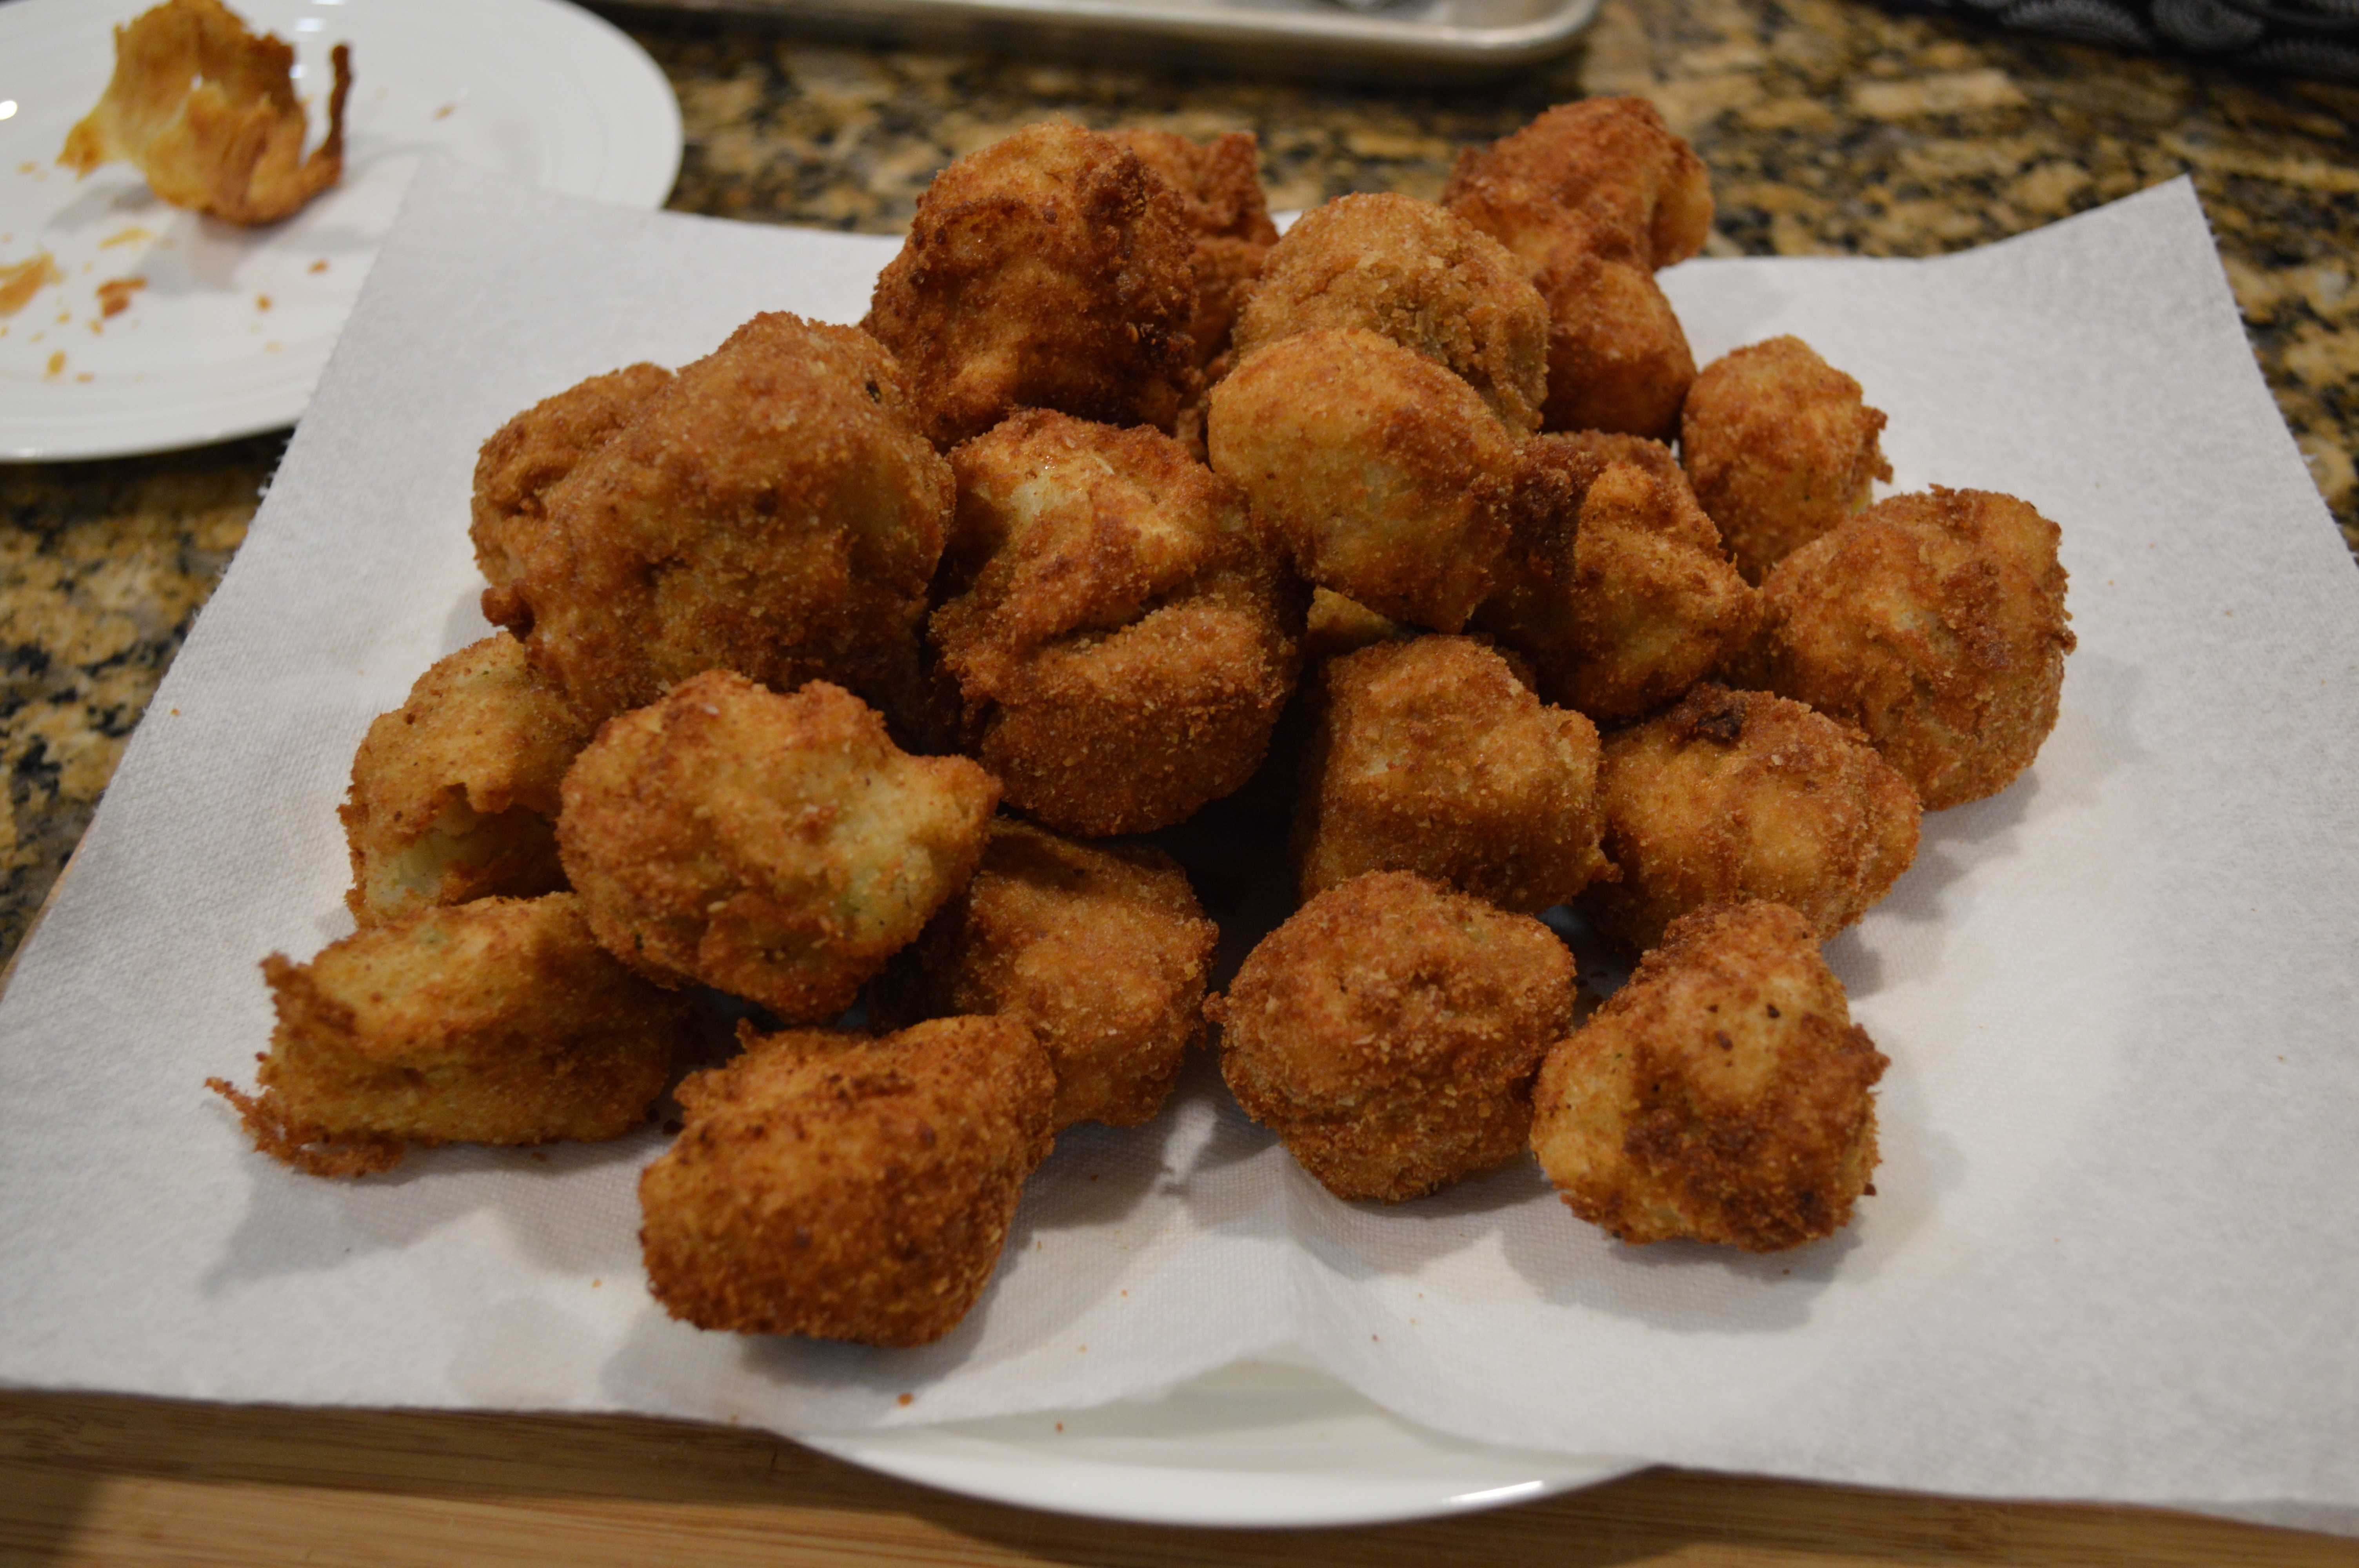 These mashed potato balls were extremely easy to make and tasted delicious.